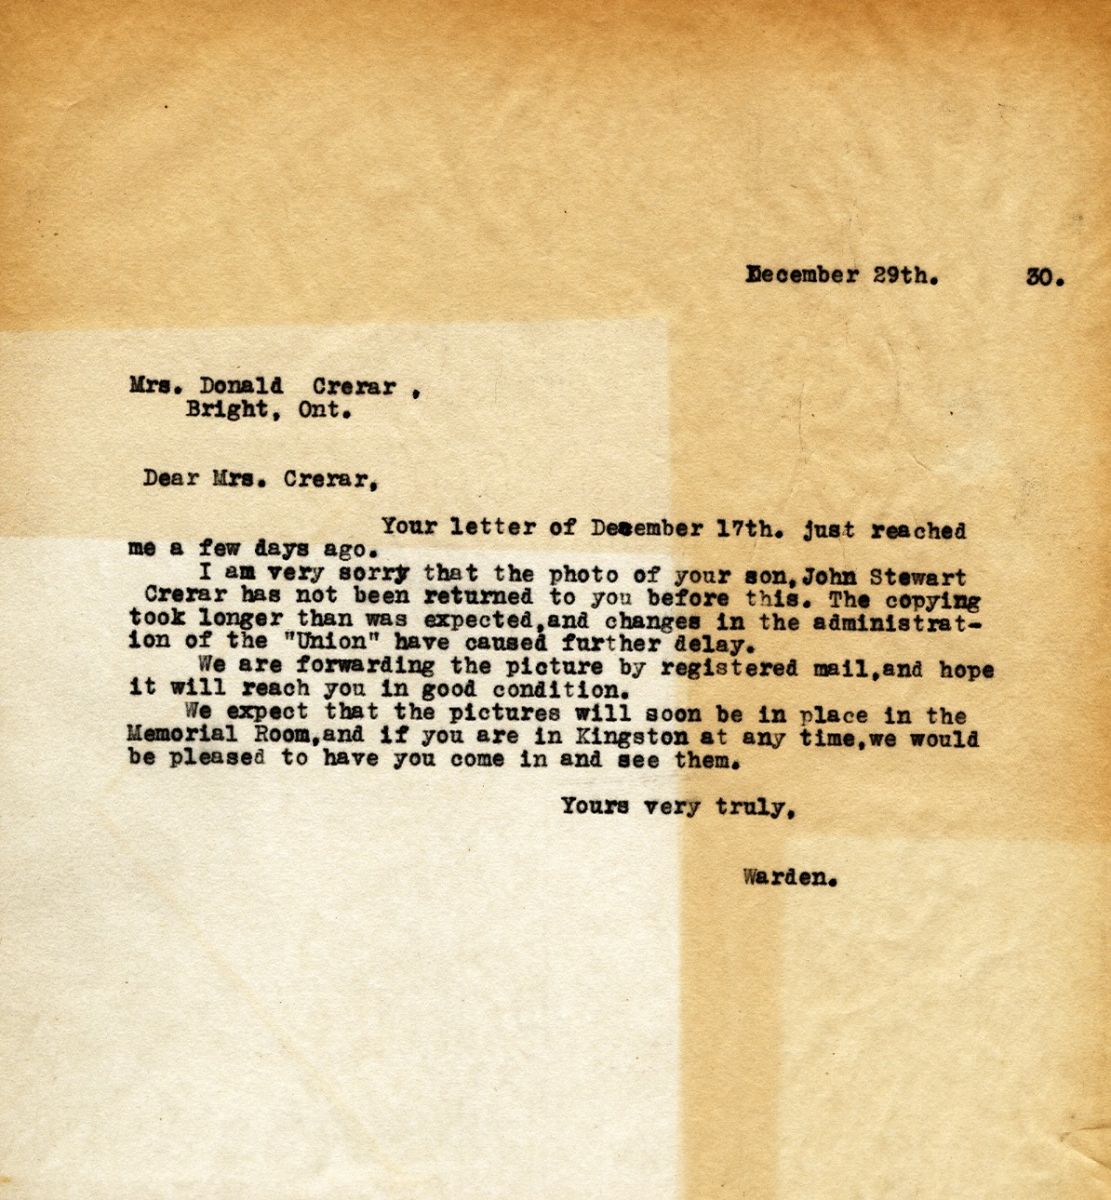 Letter from the Warden to Mrs. Donald Crerar, 29th December 1930